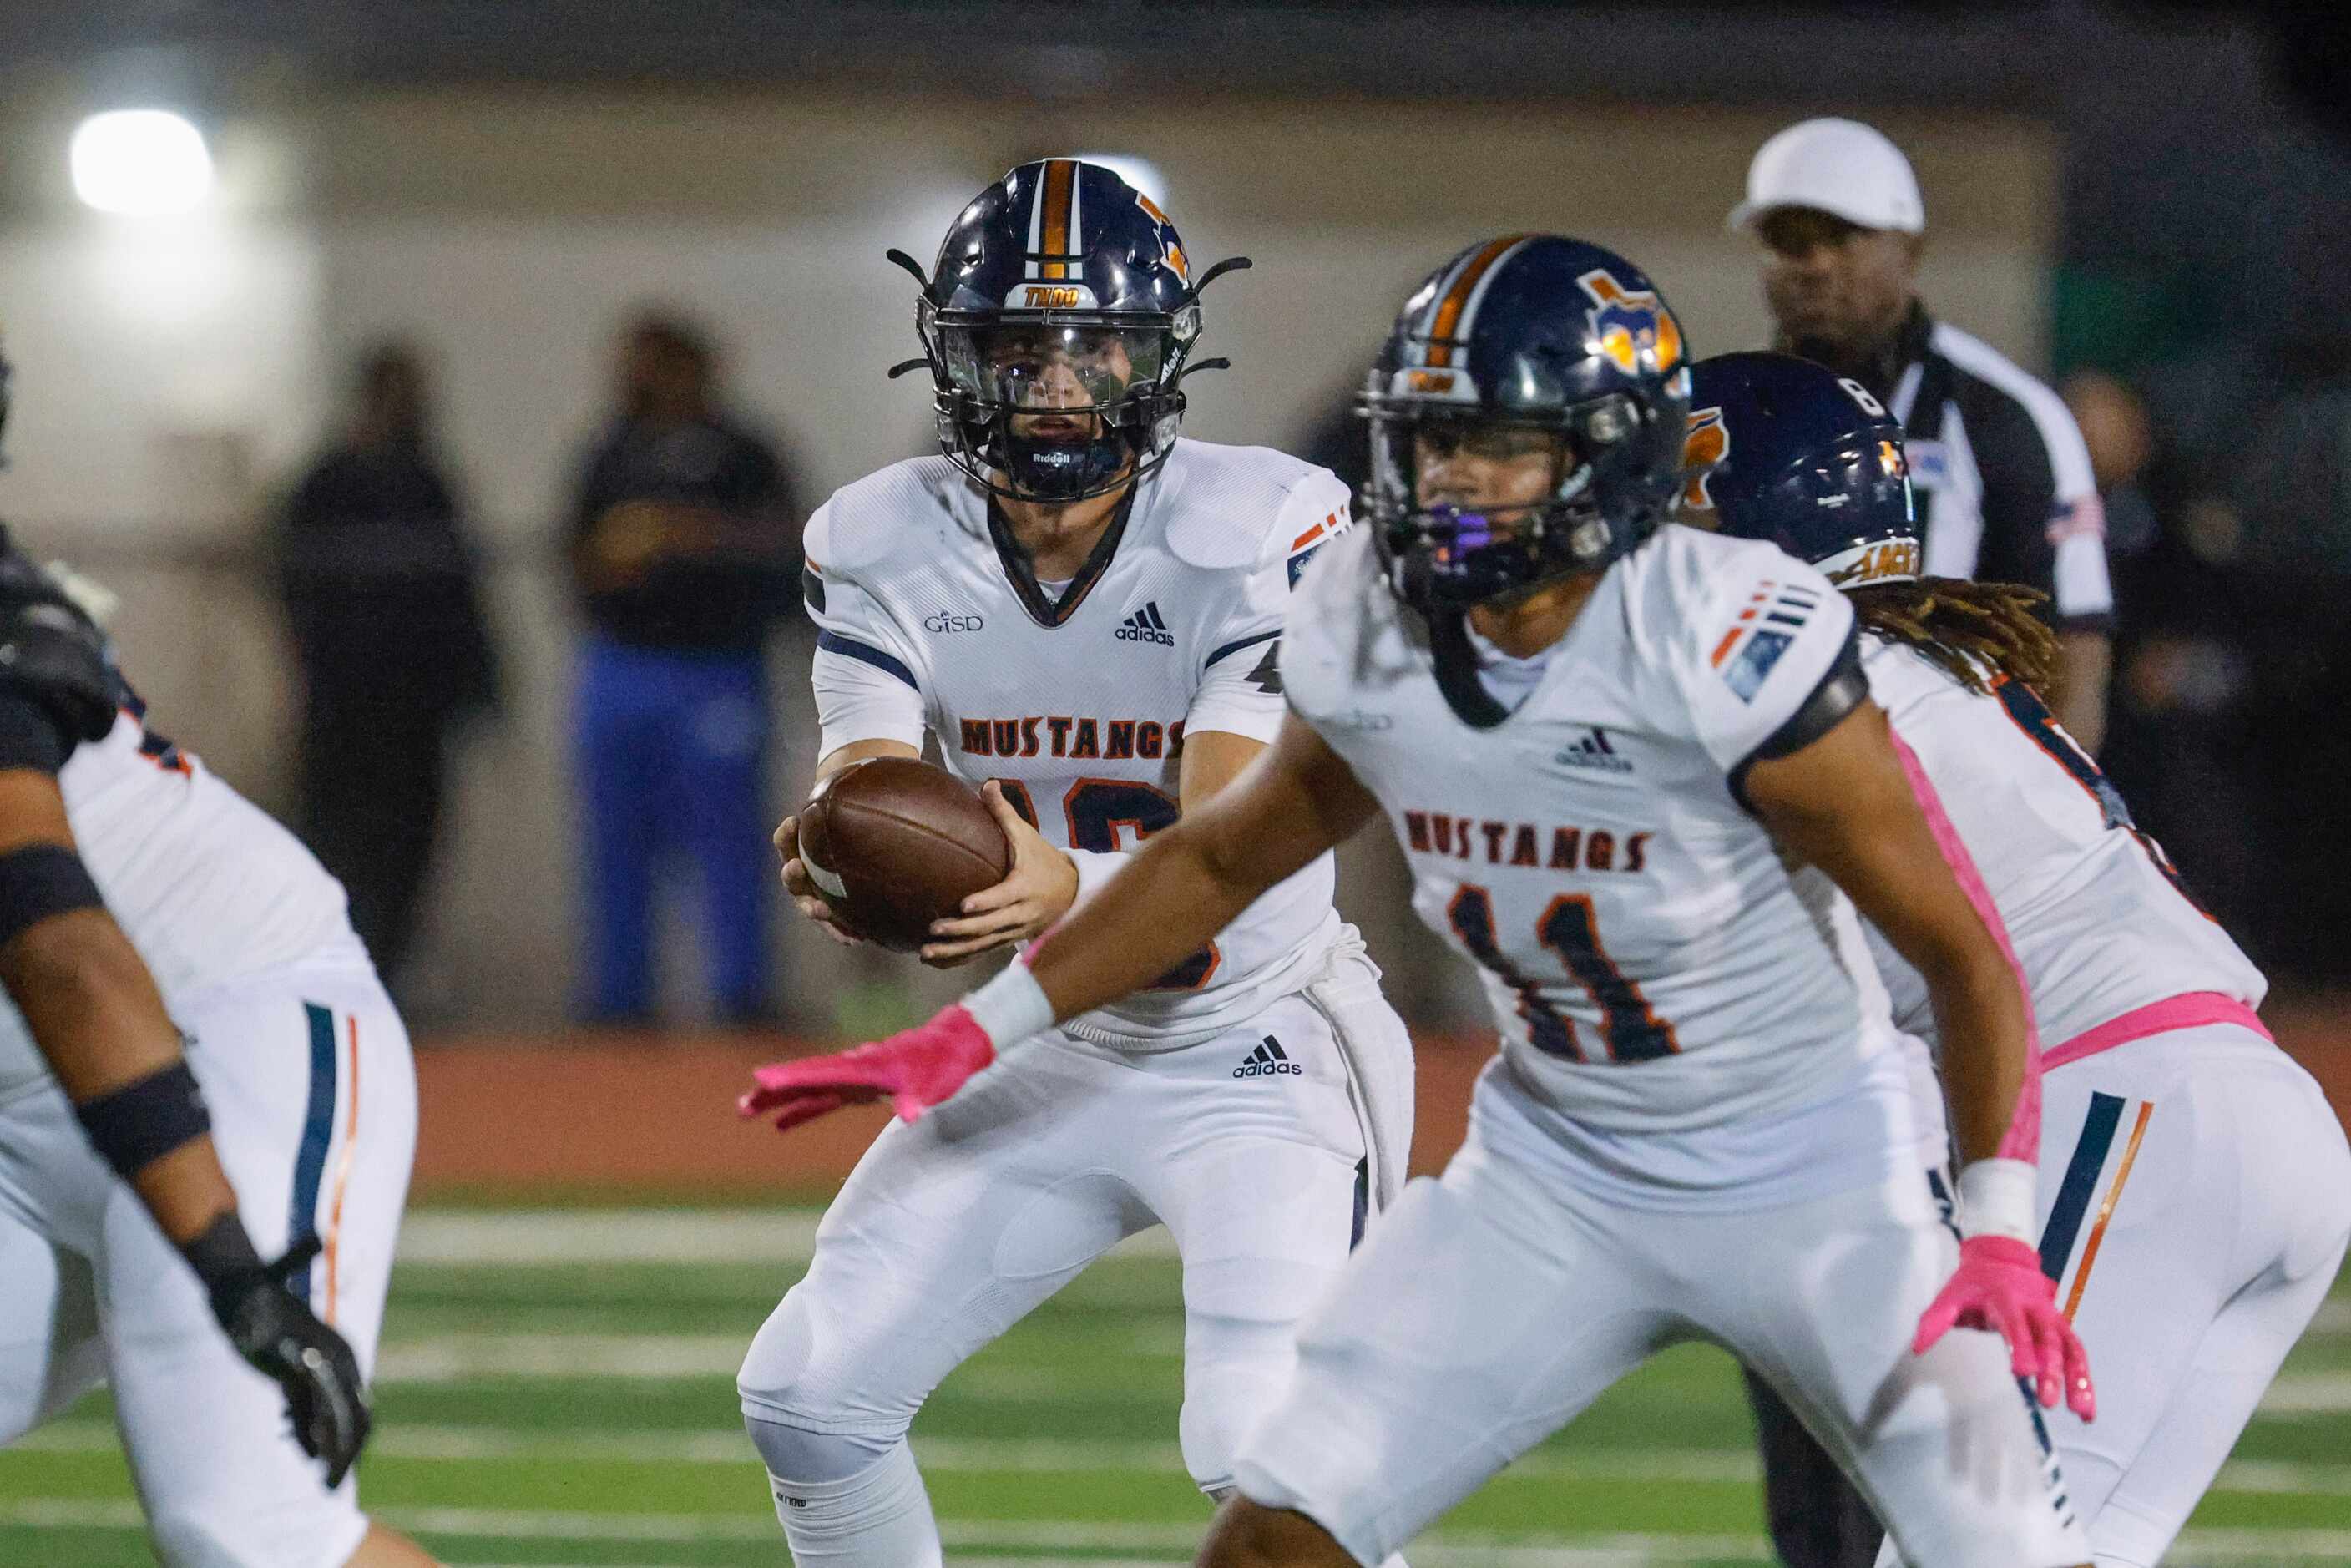 Sachse high school’s QB Brenden George passes the ball against Garland High School during...